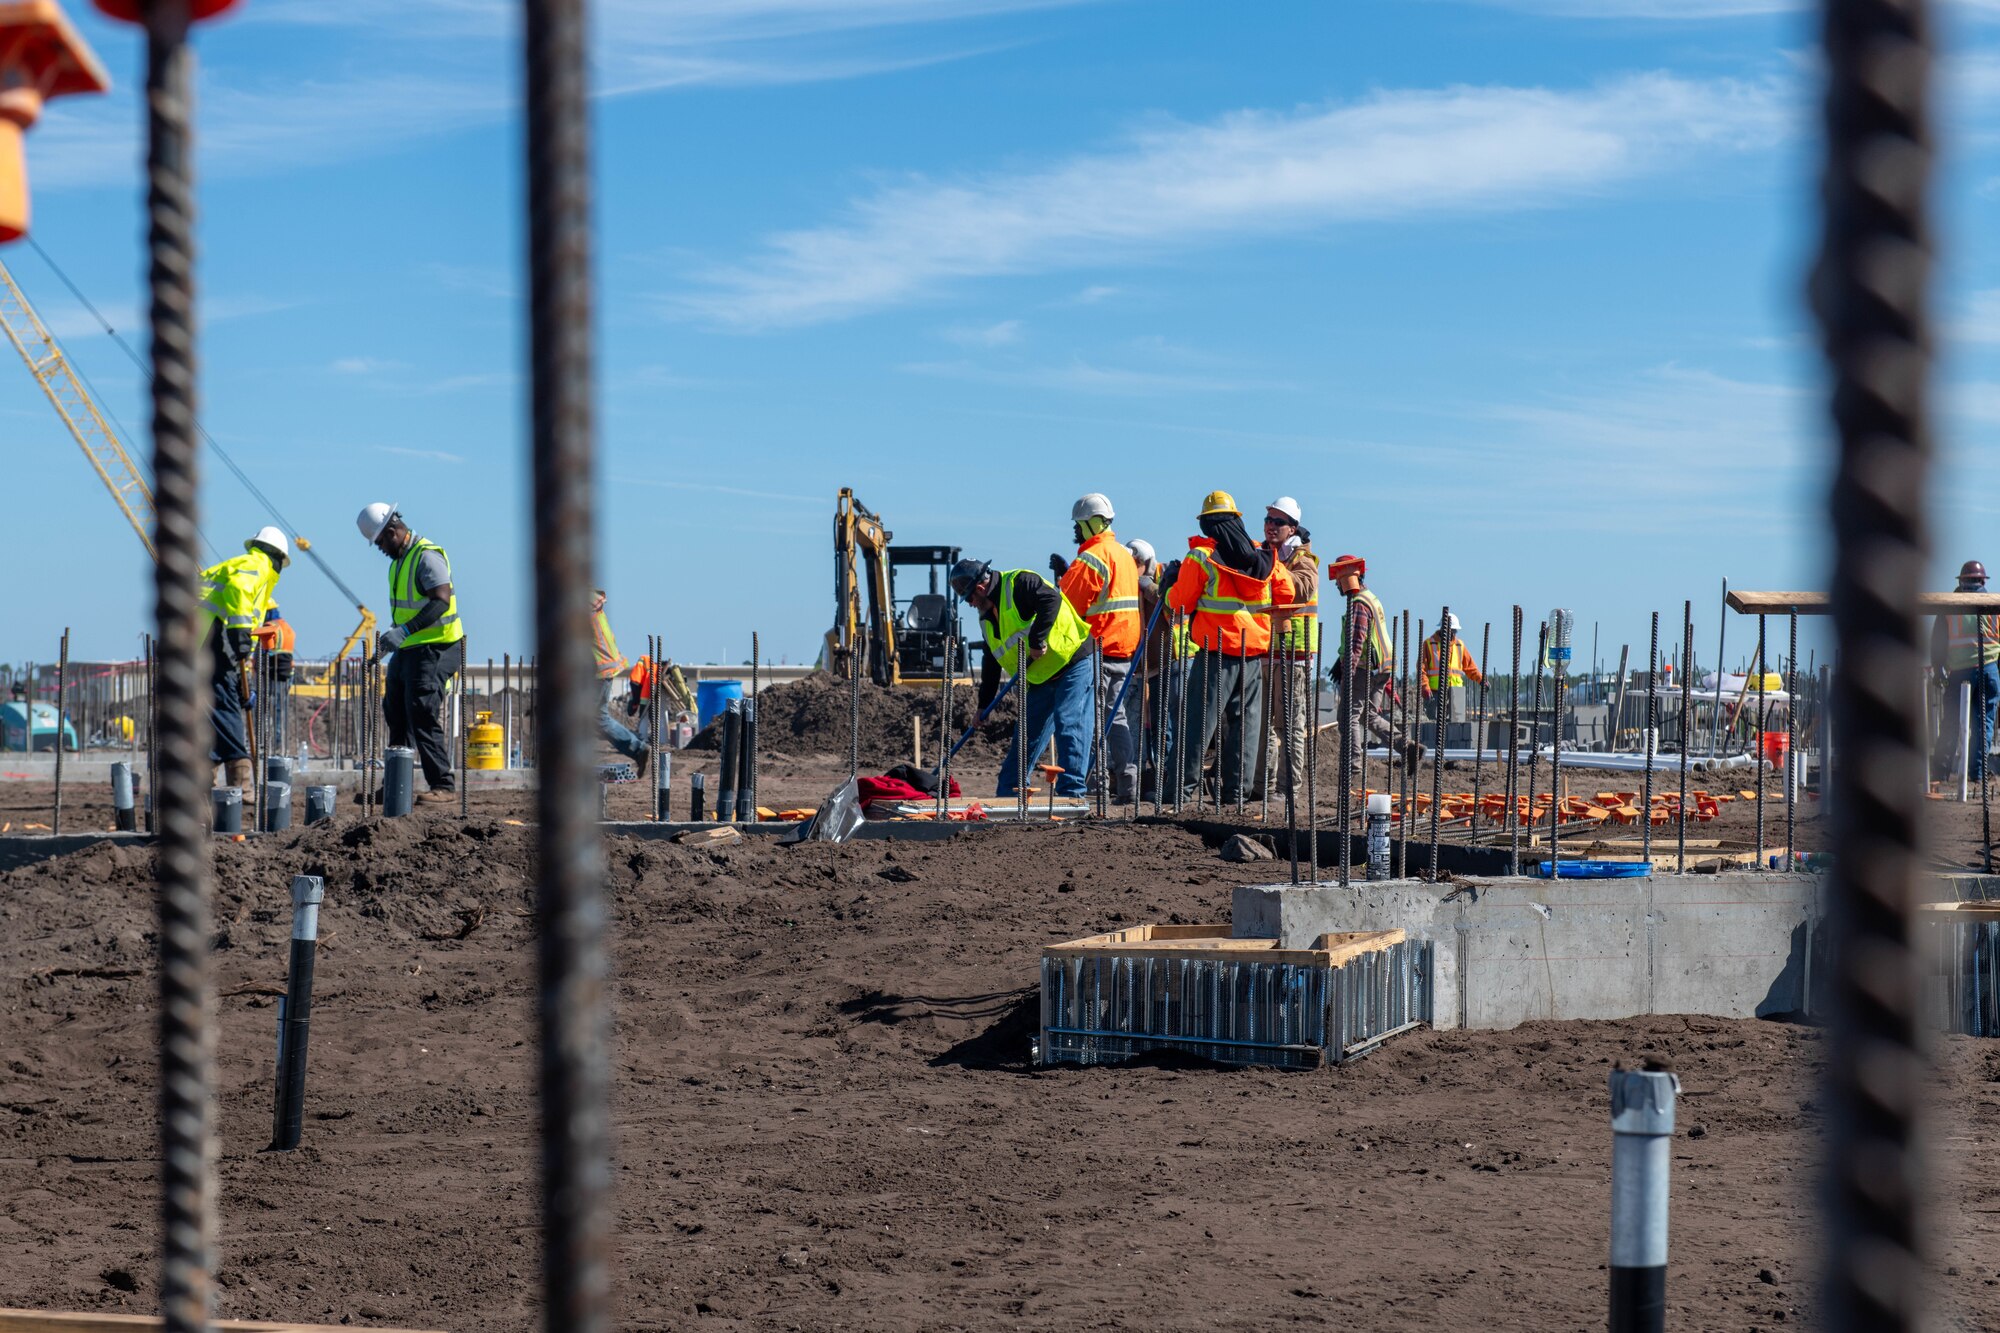 A group of construction workers can be seen working on a construction site.